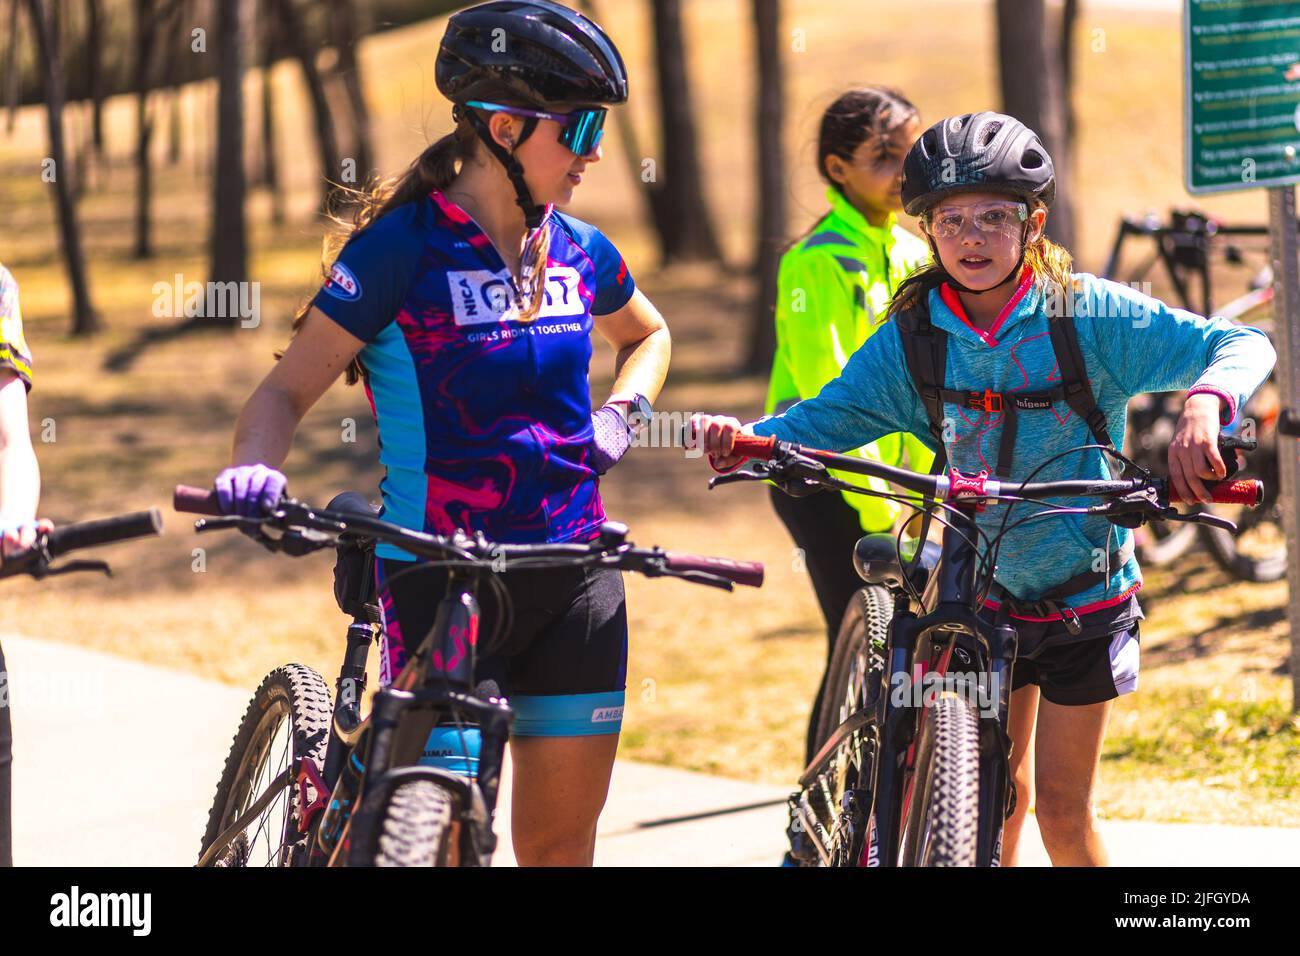 The Caucasian girls getting ready to ride a bike in a race held in the DFW metroplex in Texas Stock Photo